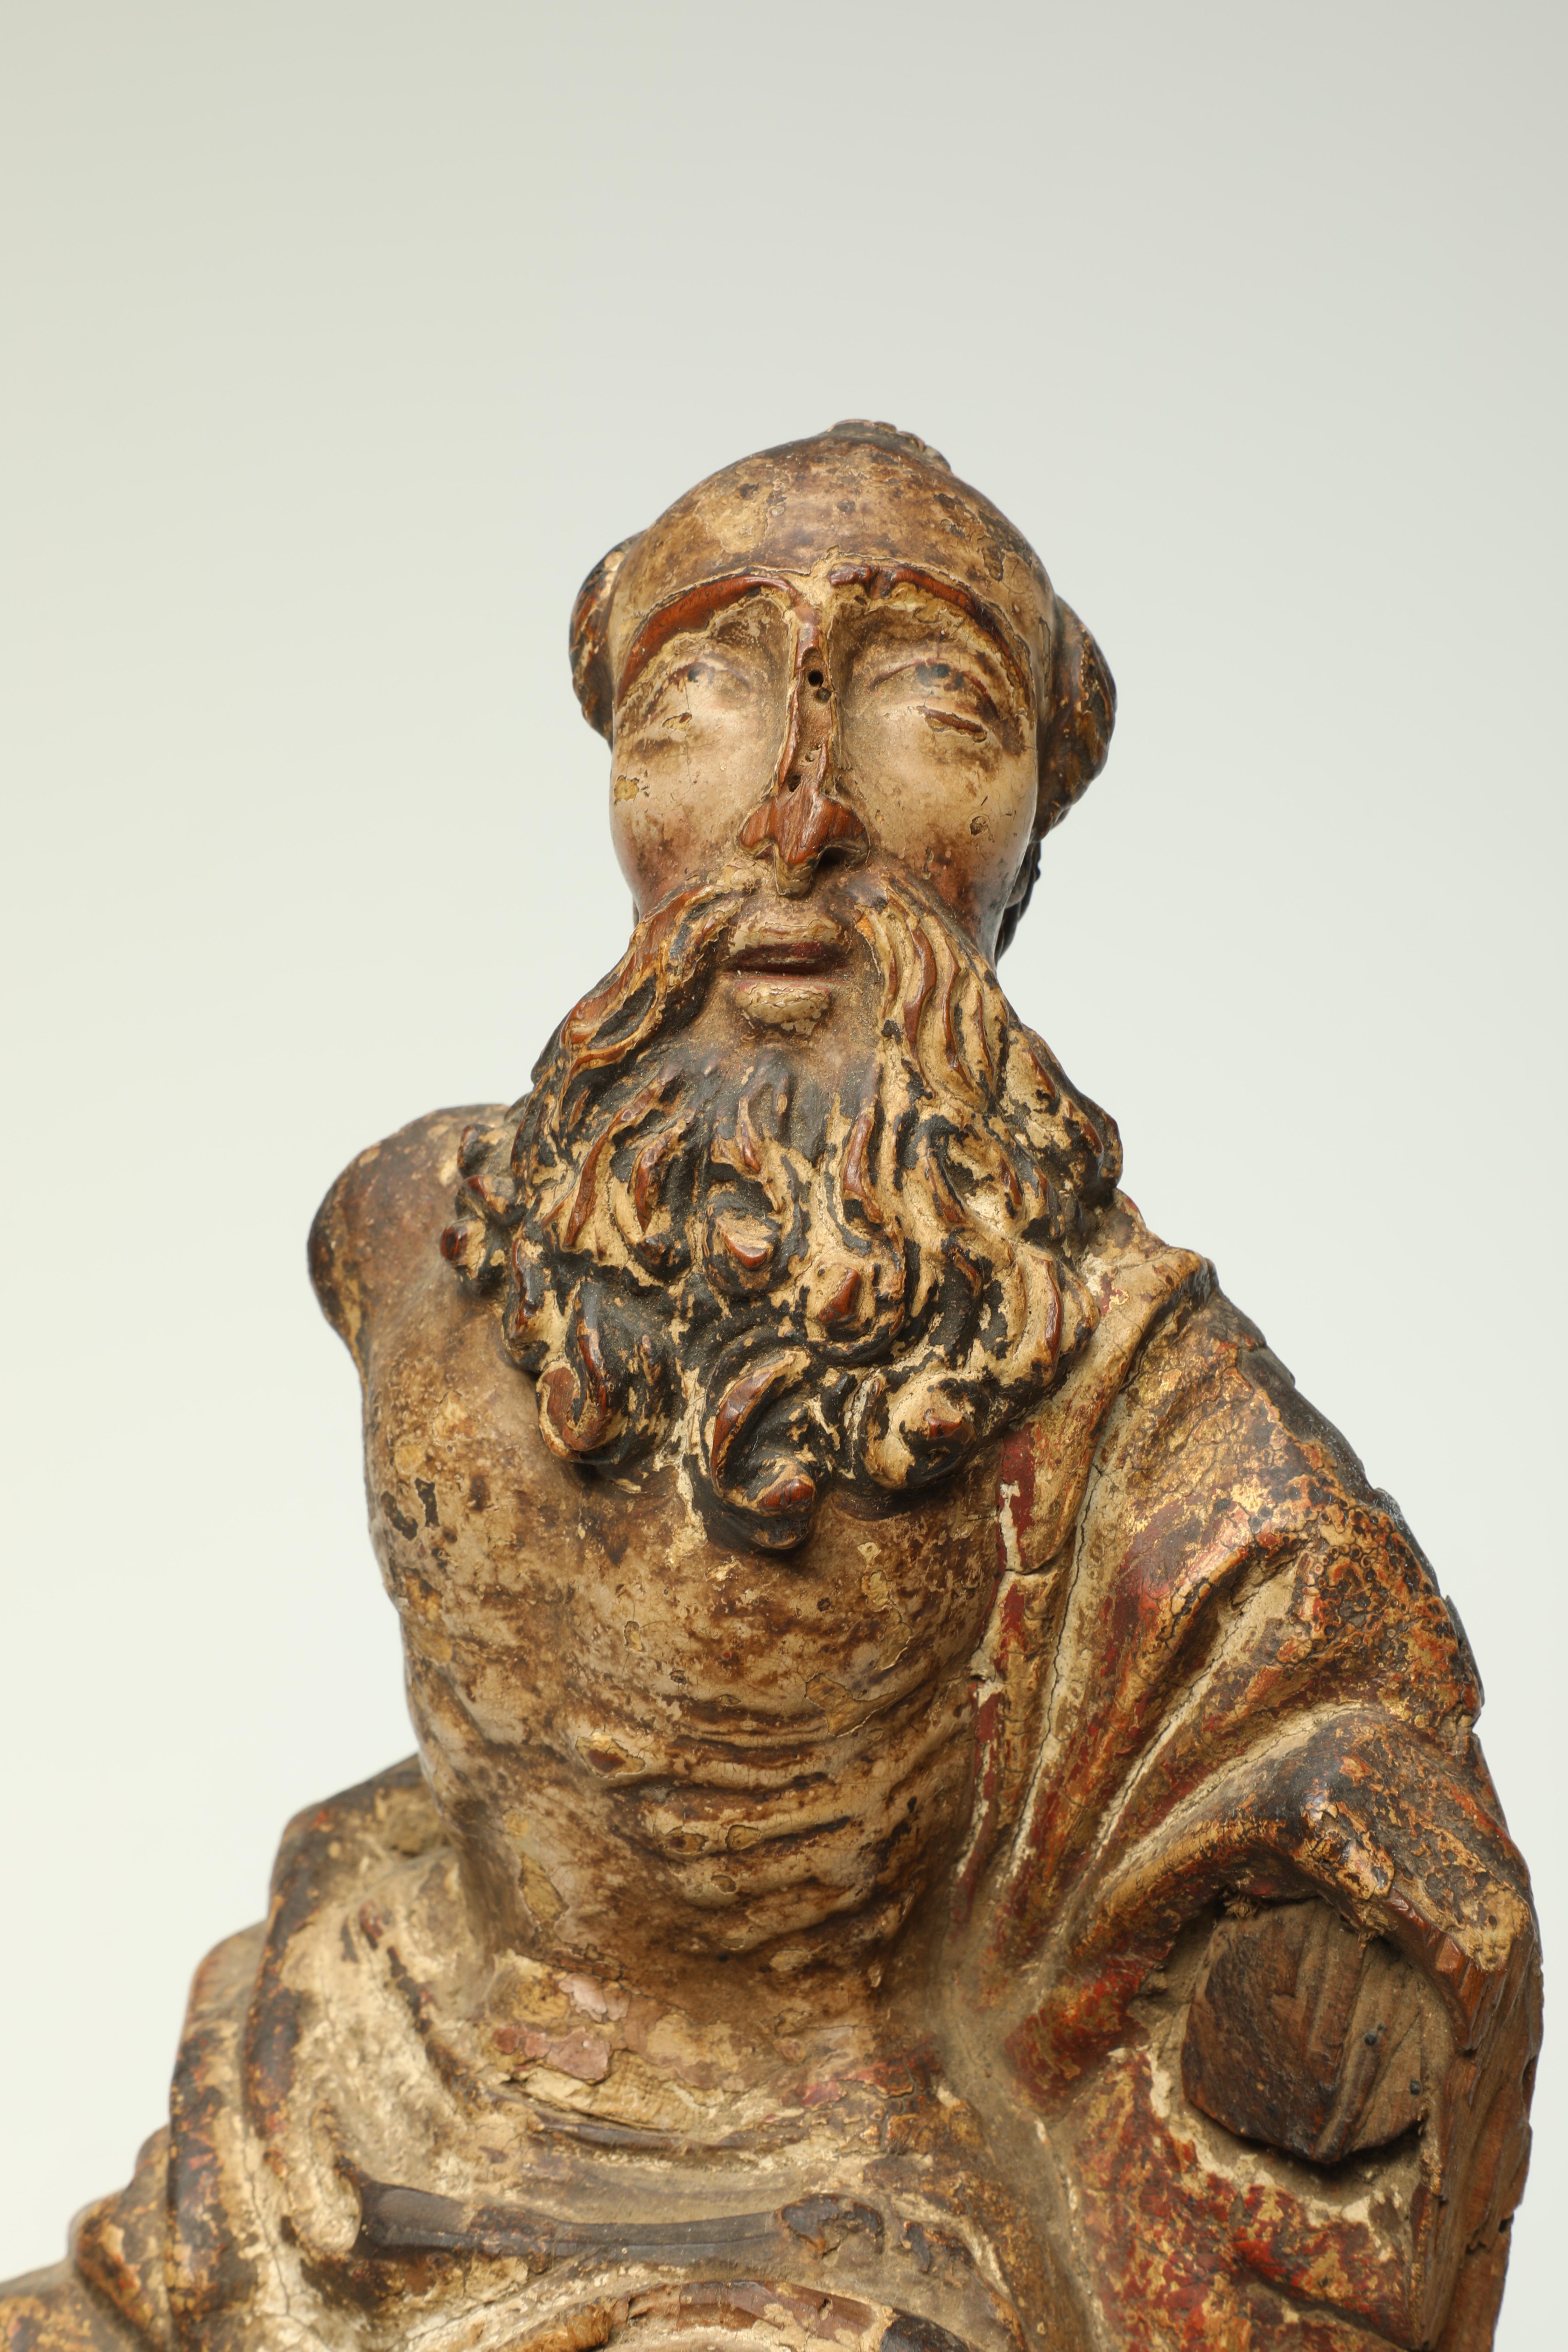 Hand-Carved Antique 17th-18th Century Wood Italian Seated Saint Figure Fragment with Beard For Sale